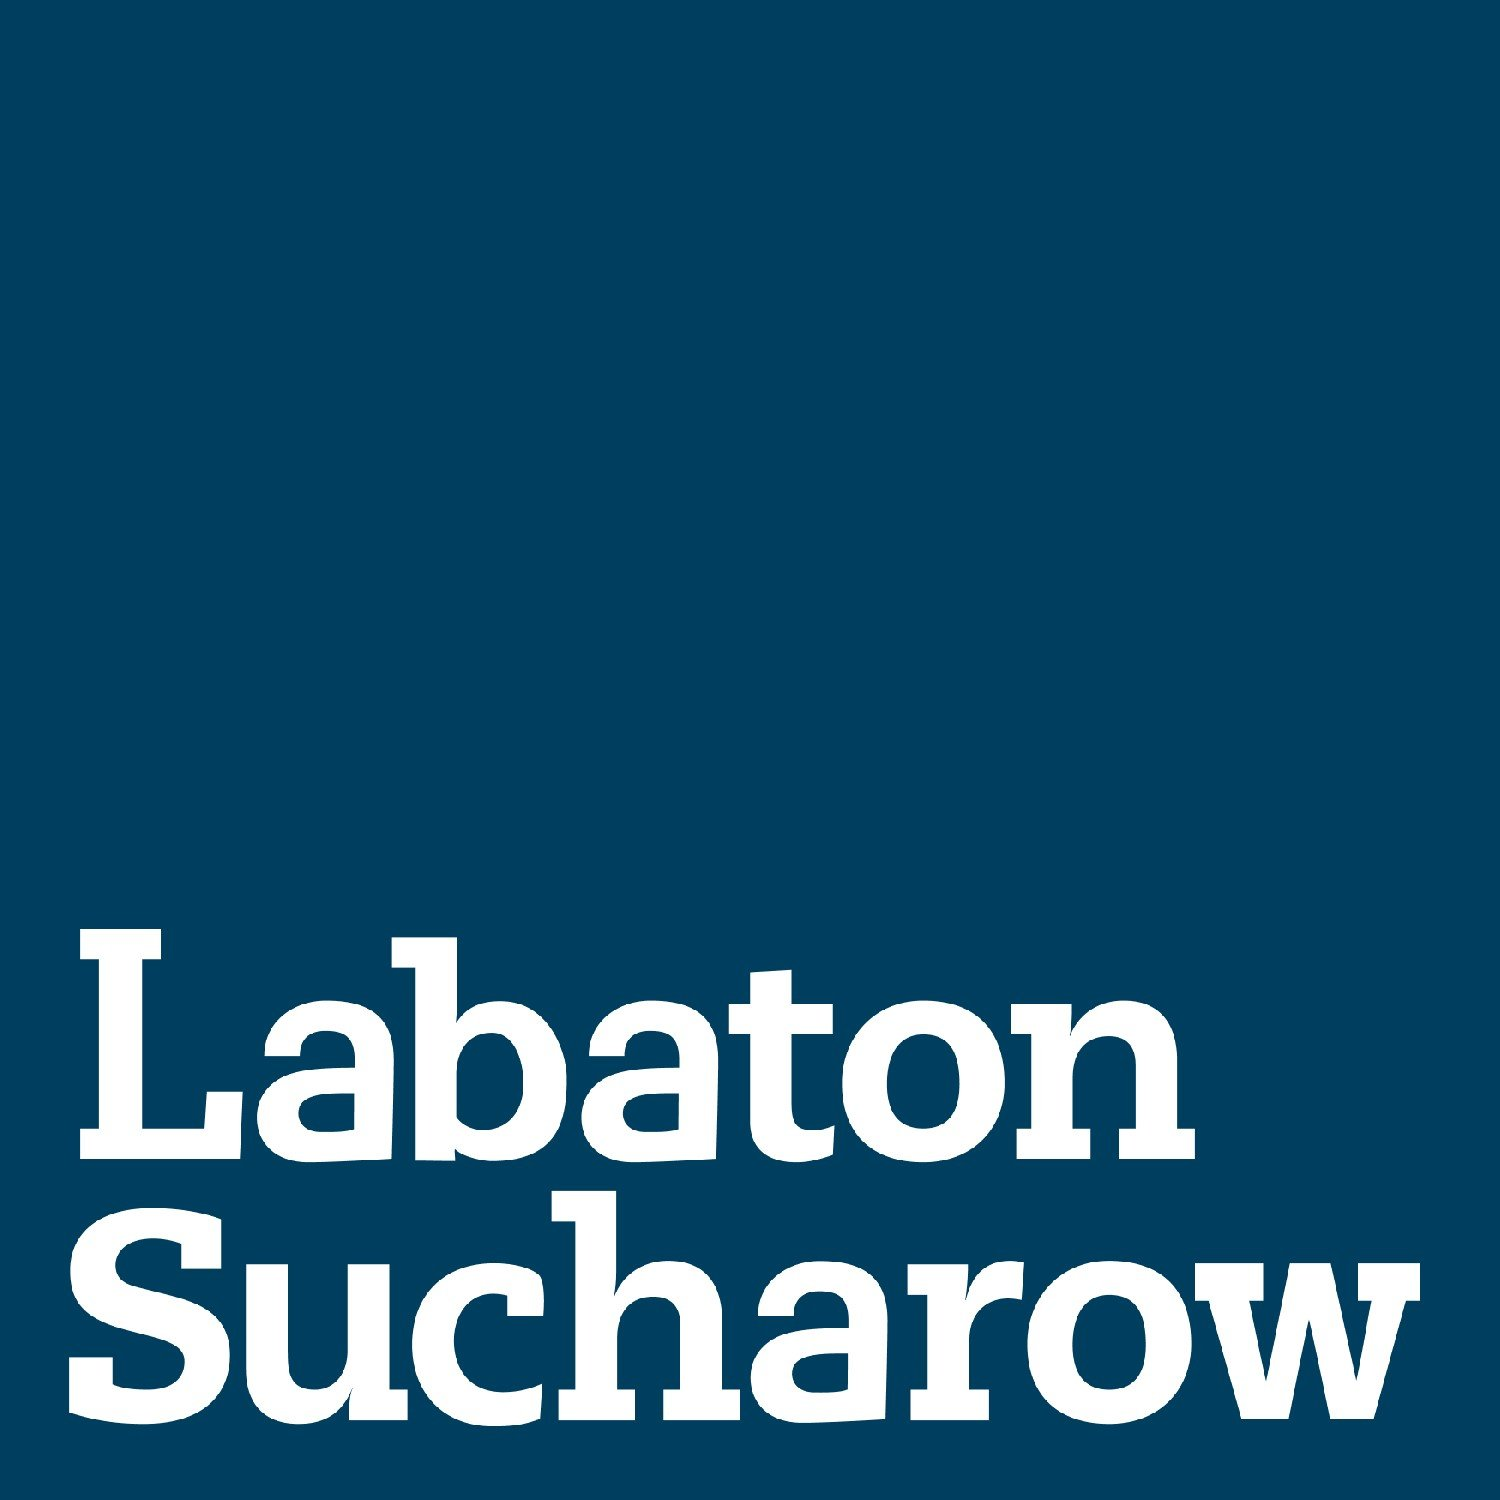 Labaton Sucharow LLP, Friday, May 28, 2021, Press release picture